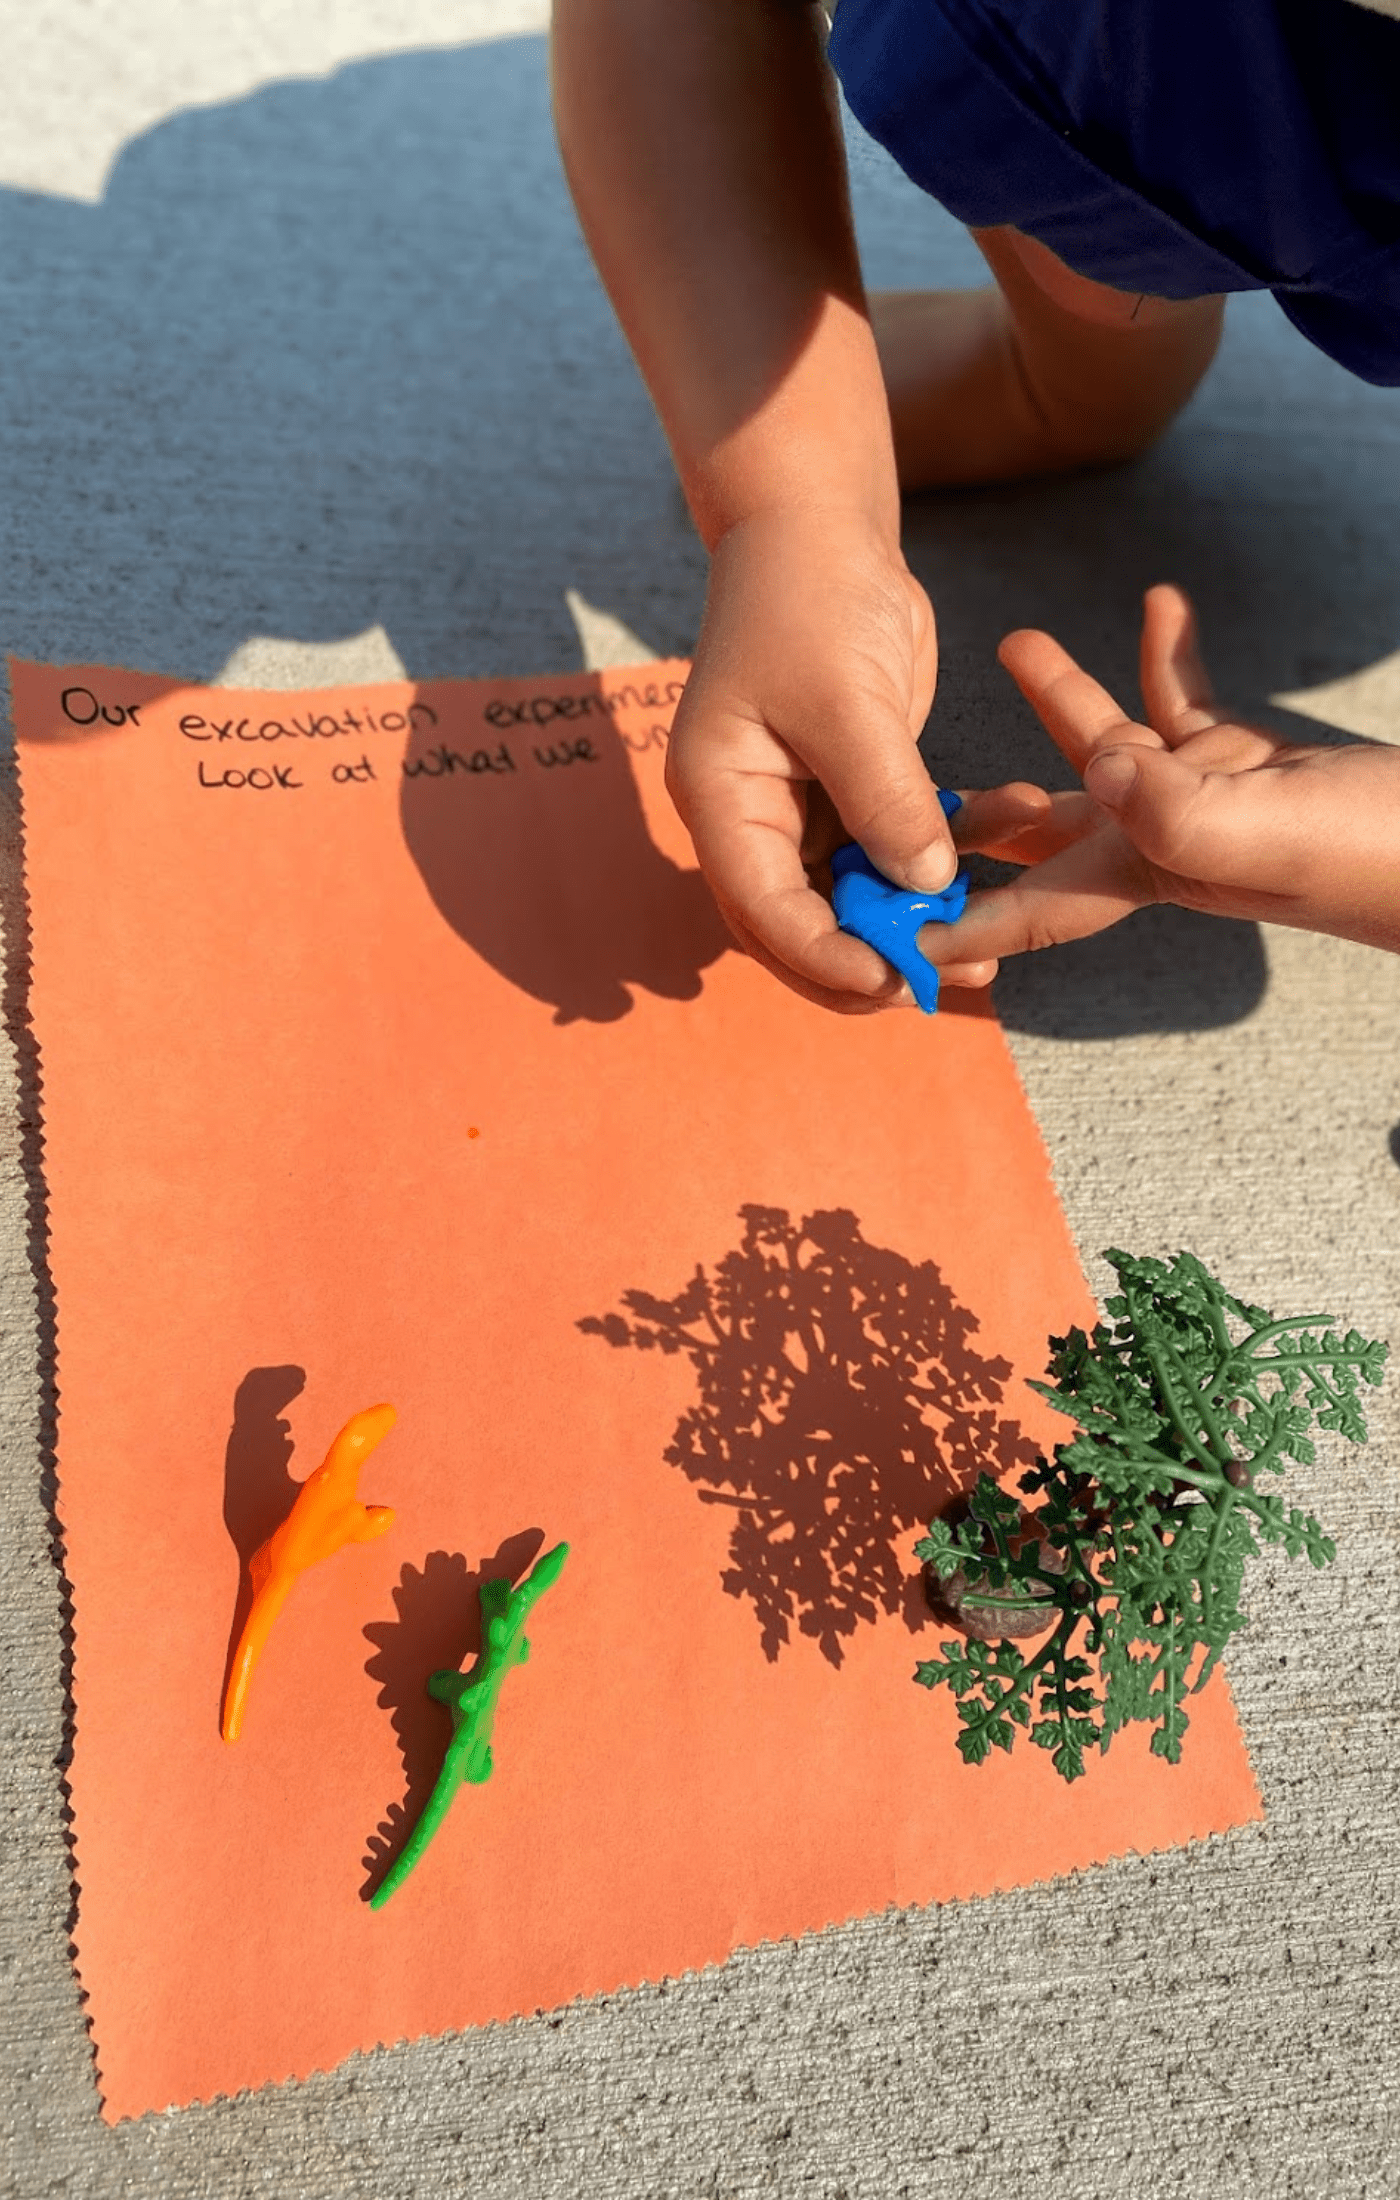 Child shadow drawing with toy dinosaurs